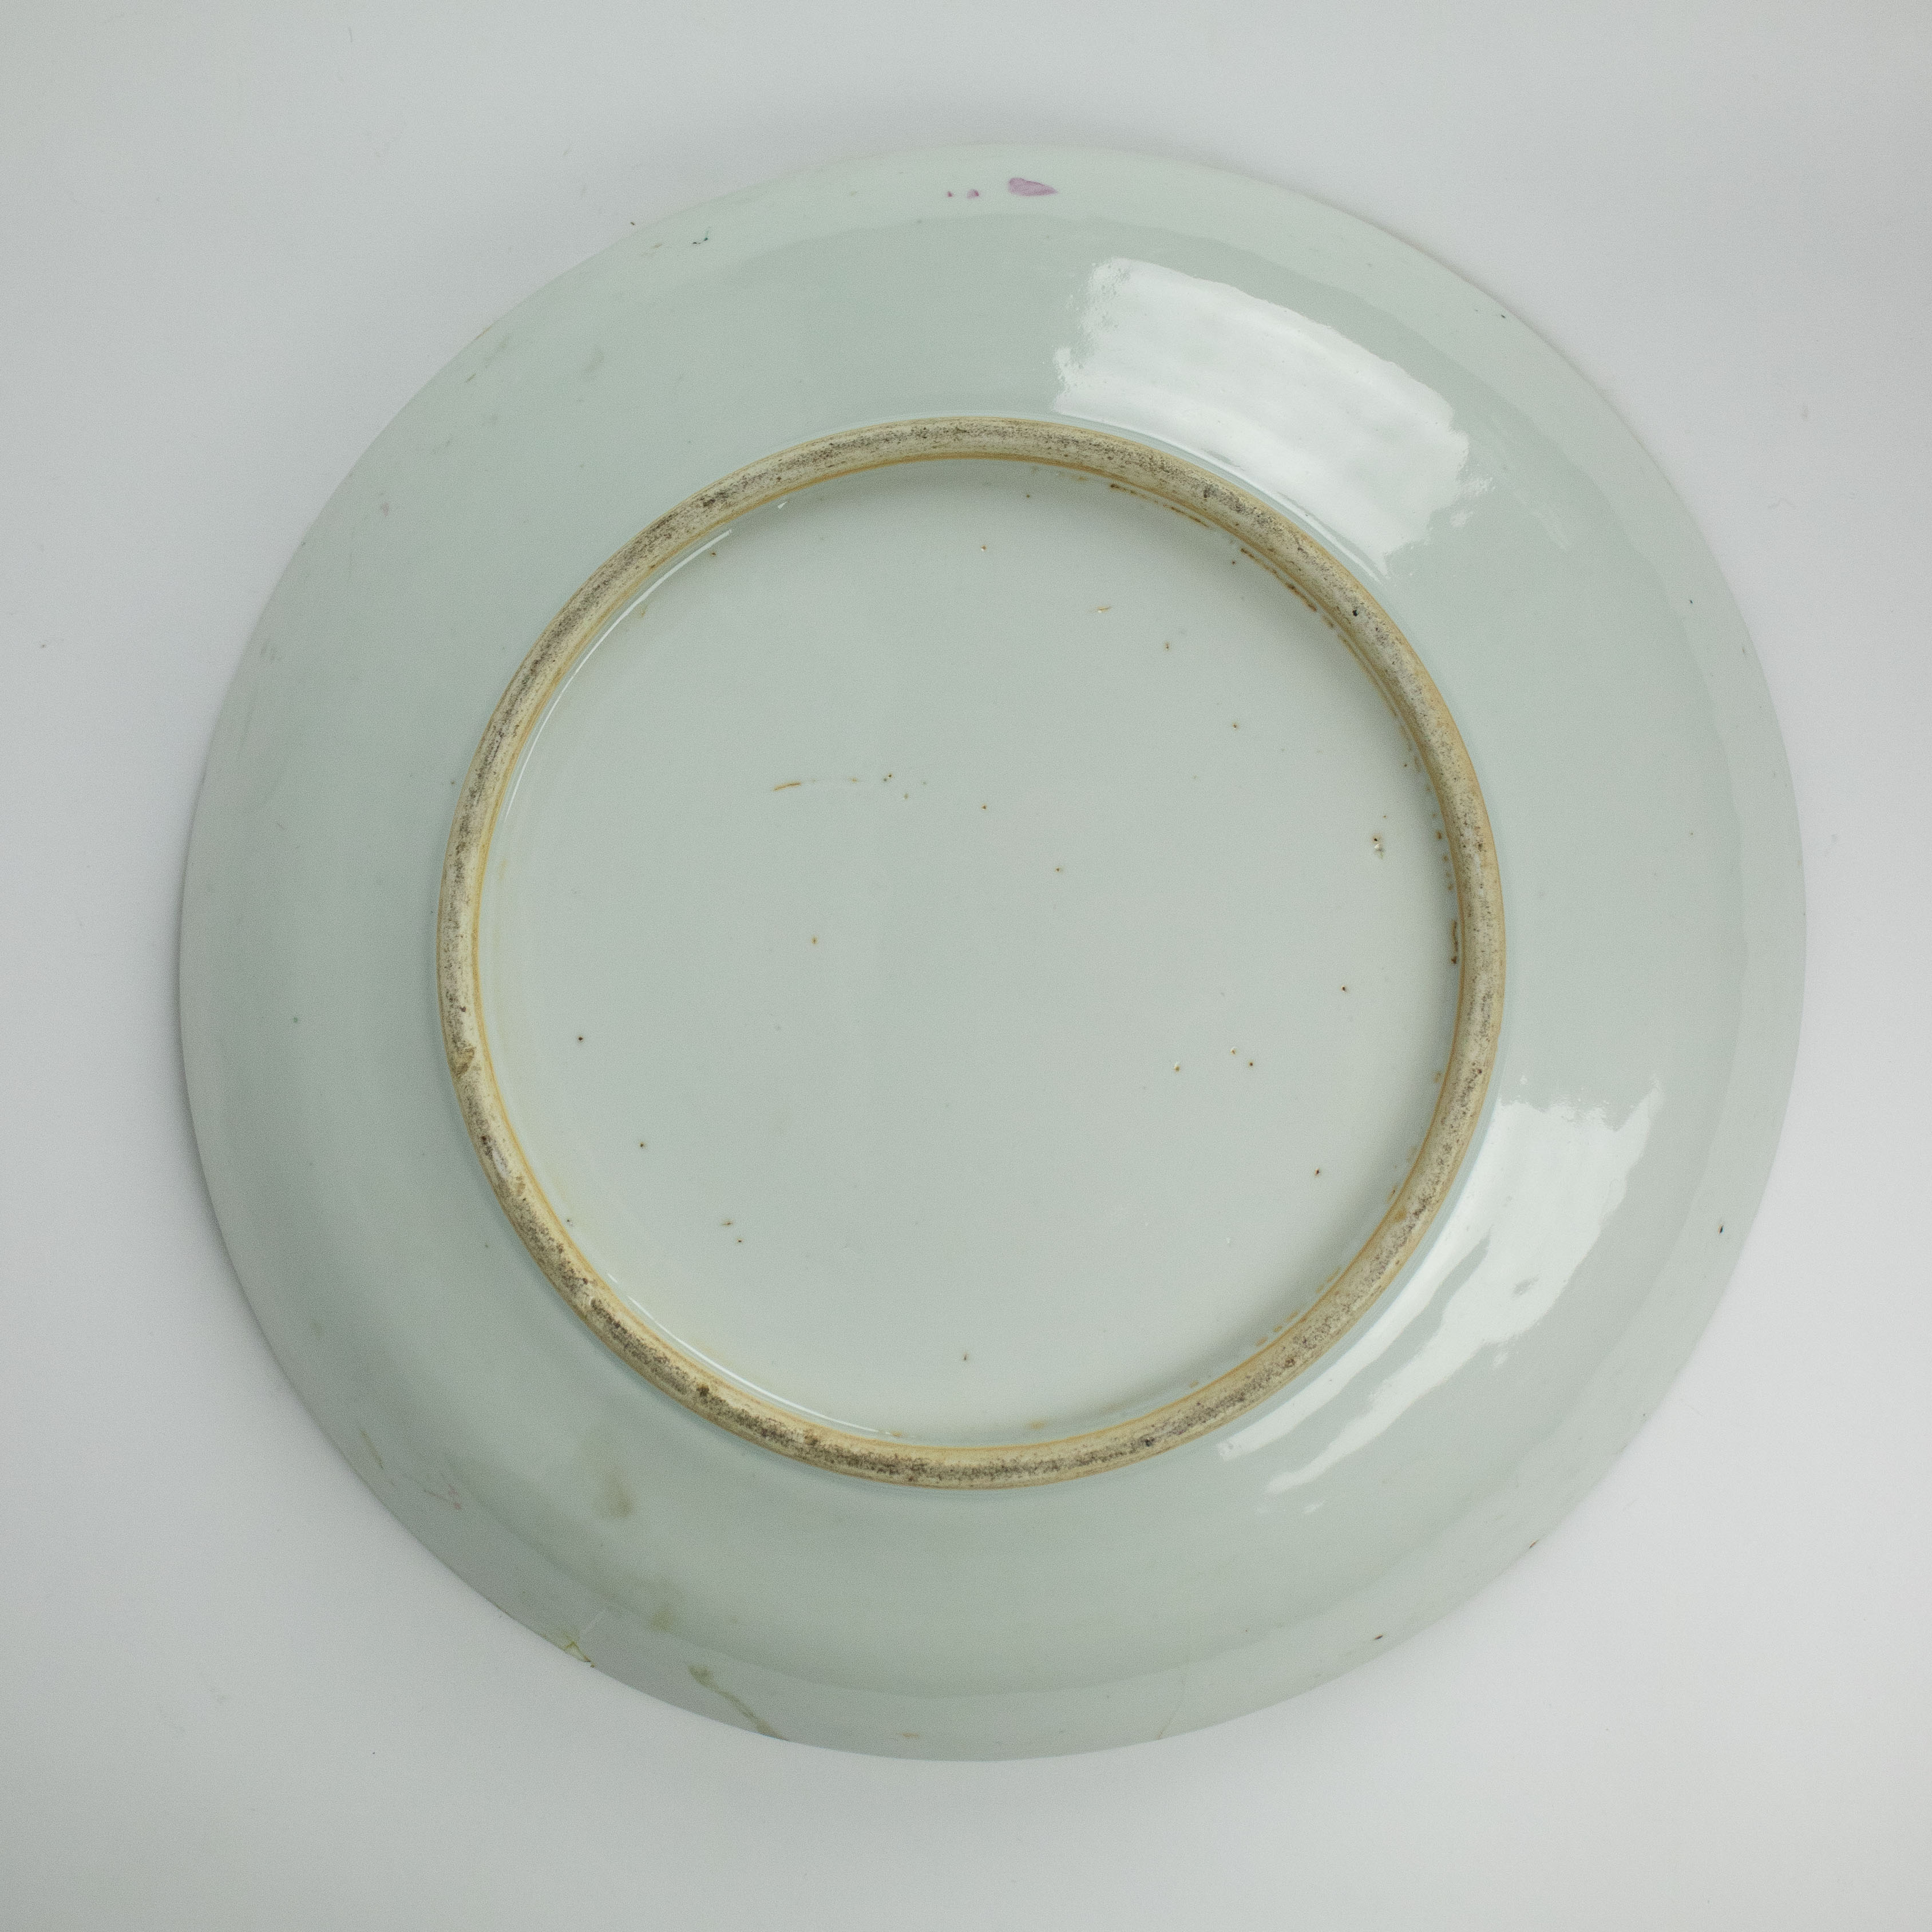 2 Canton vases and a plate - Image 10 of 11